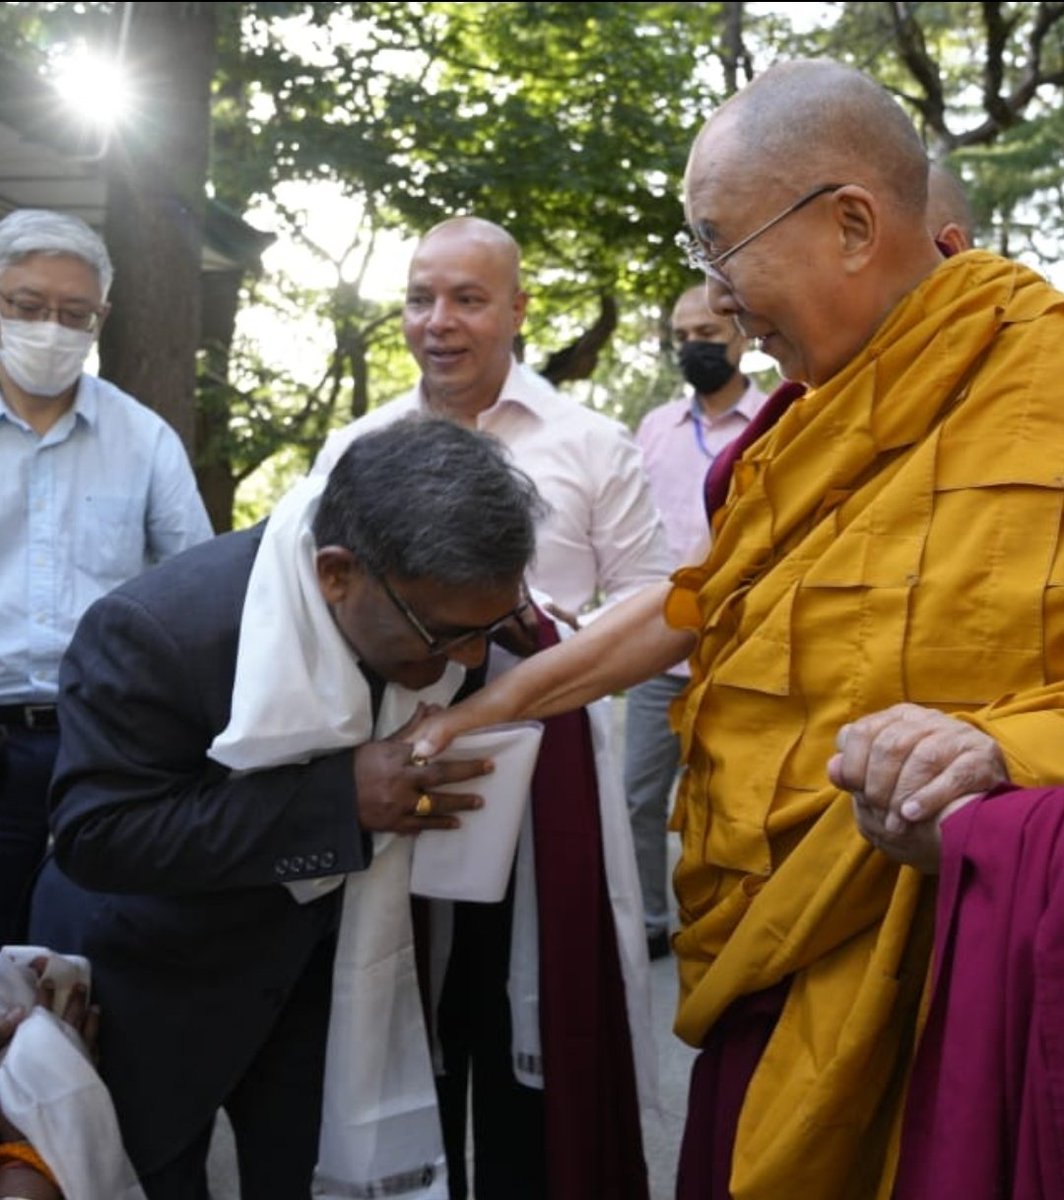 Blessings showered by His Holiness the Dalai Lama during the courtesy call at his Dalal Lama Temple/Center at Dharamshala, Himachal Pradesh. I requested him to do something for world peace, disturbed by some powerful countries and handed over a message of Goodwishes.